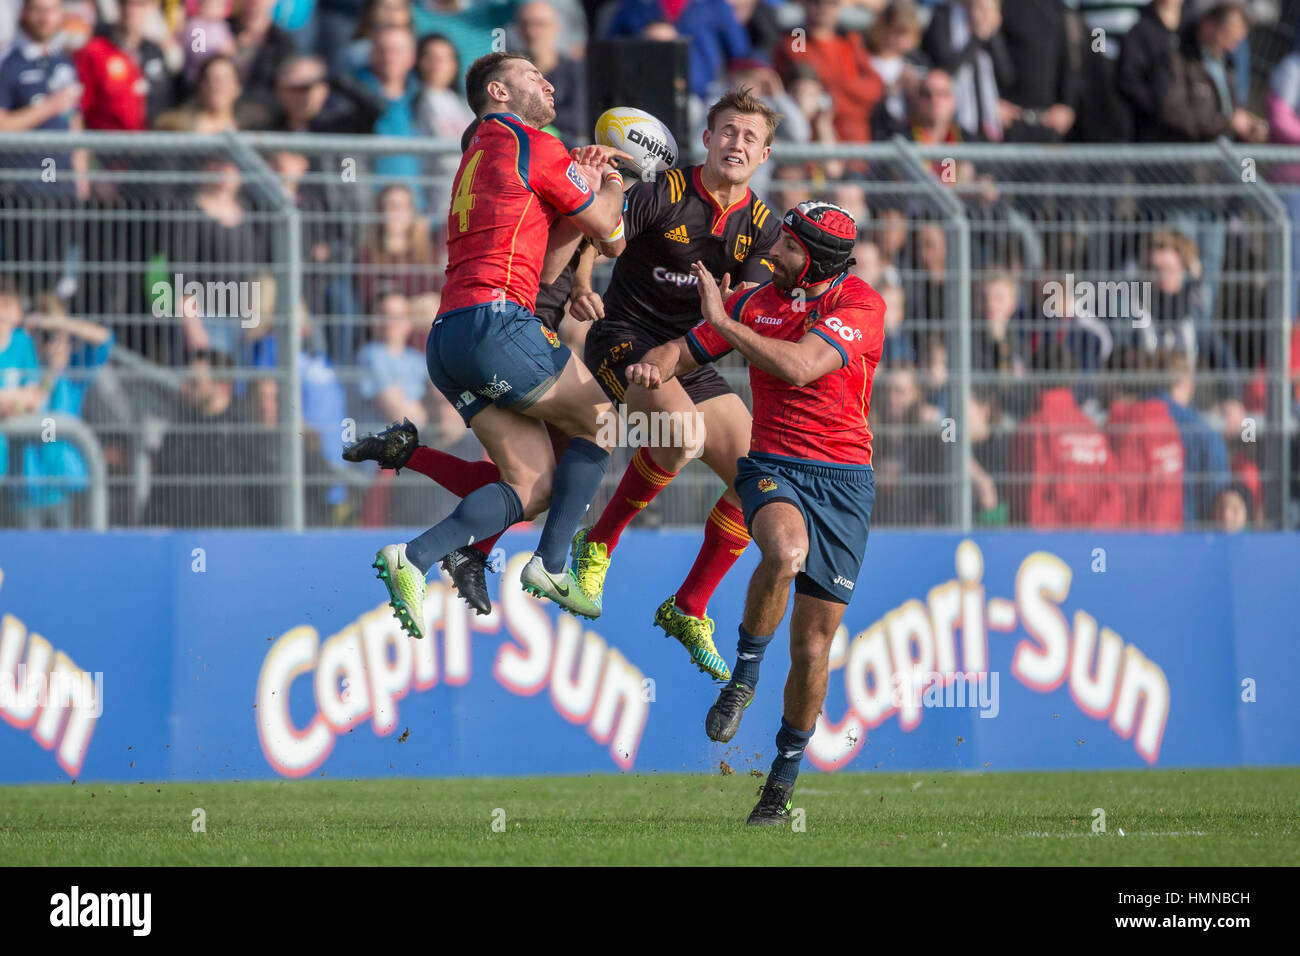 Cologne, Germany. 11th Mar, 2017. Germany's Marcel Coetzee (c) and Spain's David Barrera Howarth (l) and Mathieu Belie in action during the European Rugby Championship Division 1A match between Germany and Spain in Cologne, Germany, 11 March 2017. Photo: Jürgen Keßler/dpa/Alamy Live News Stock Photo